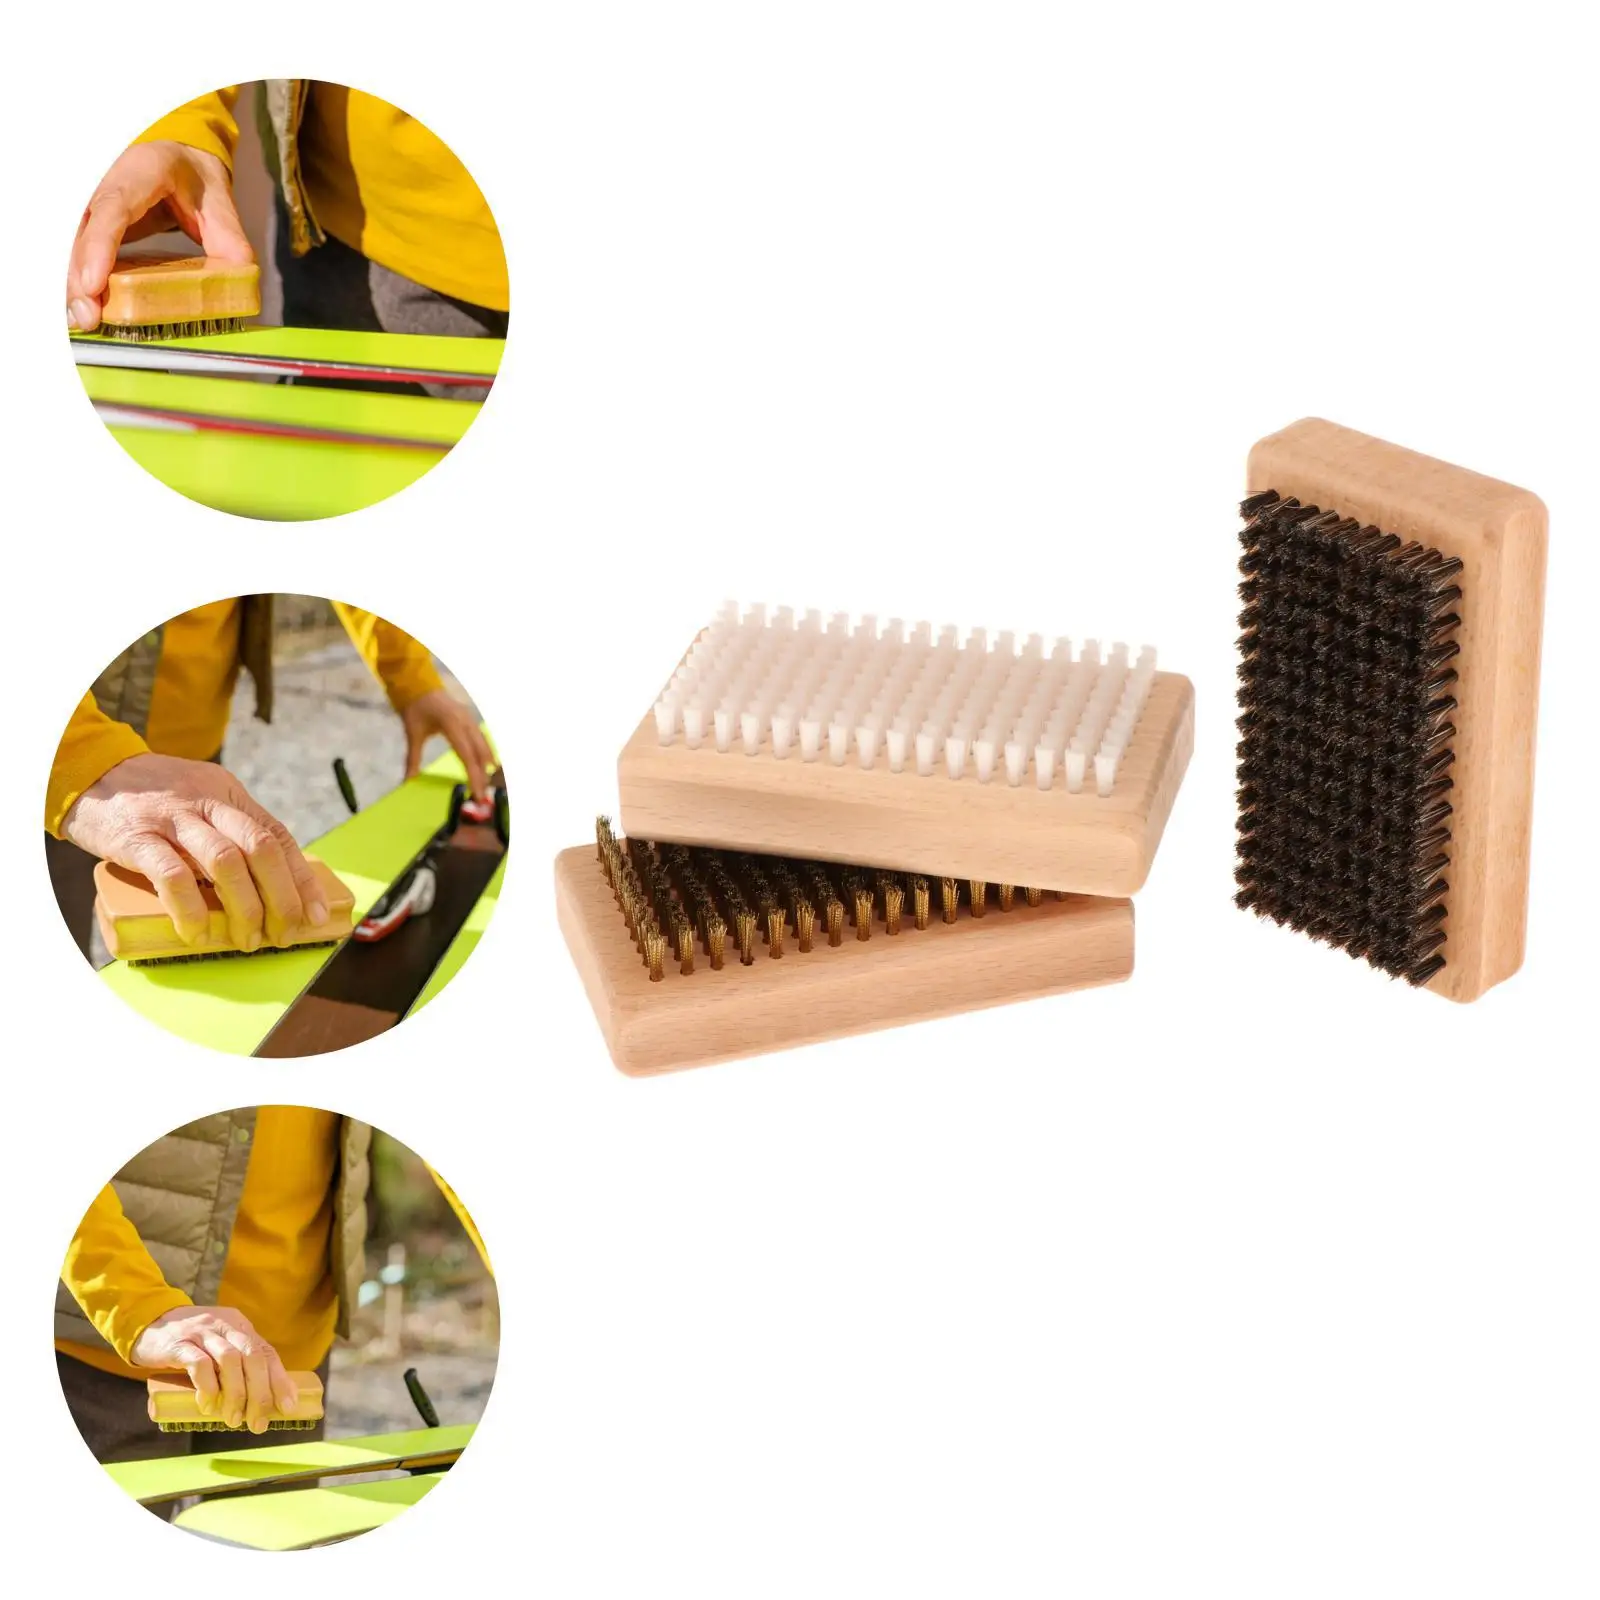 Snowboard Wax Brush Ski Brush Removing Wax Portable Durable Convenient Cleaning Brush Ski Waxing Brush for Traveling Outdoor